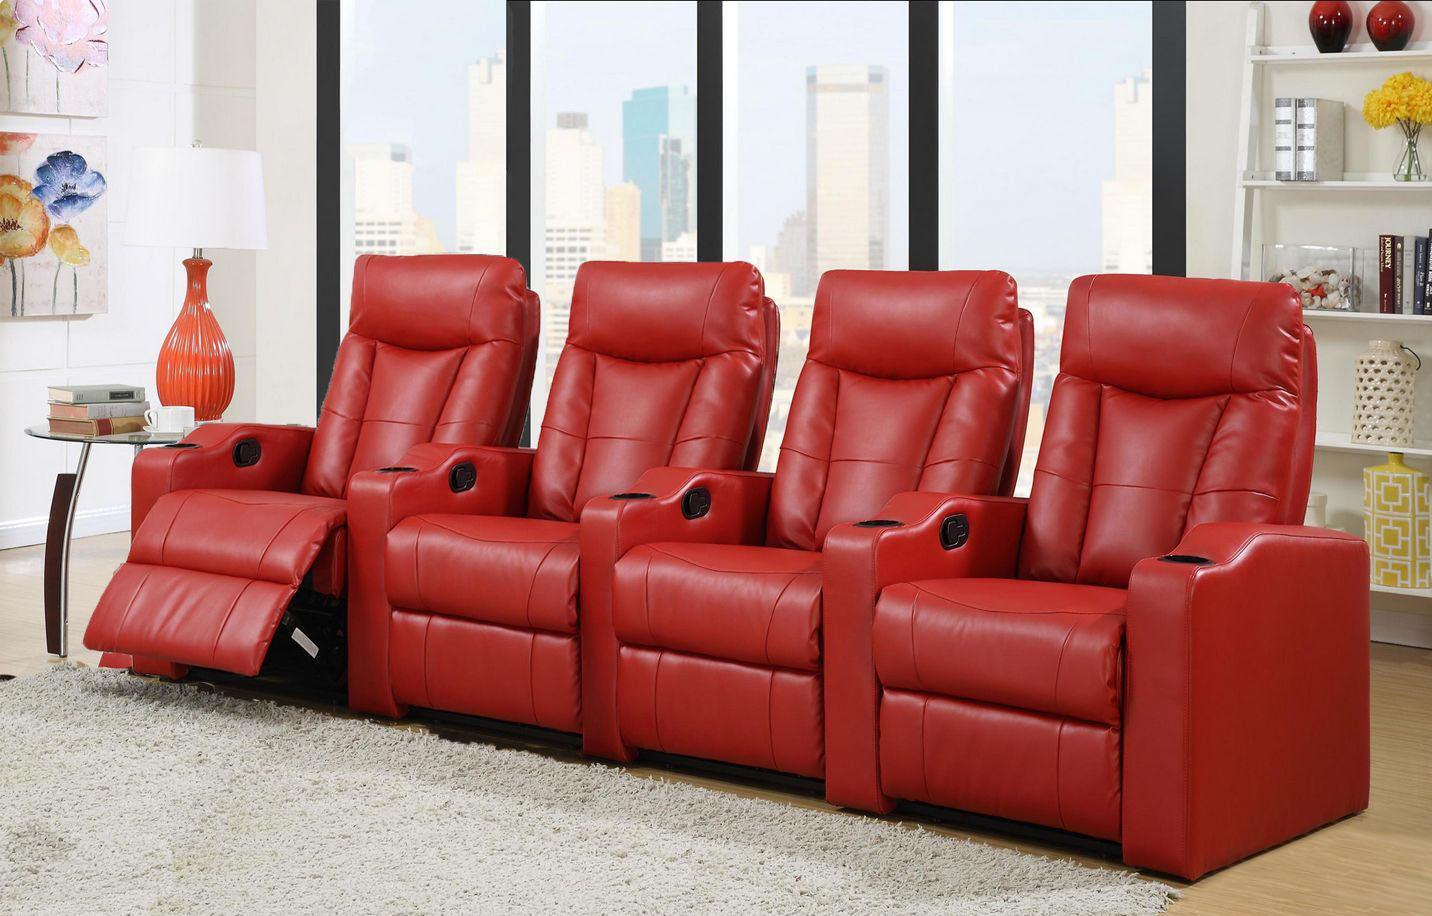 

    
Red Bonded Leather Reclining Home Theater Seating Row of 4 Seats w Cupholders
